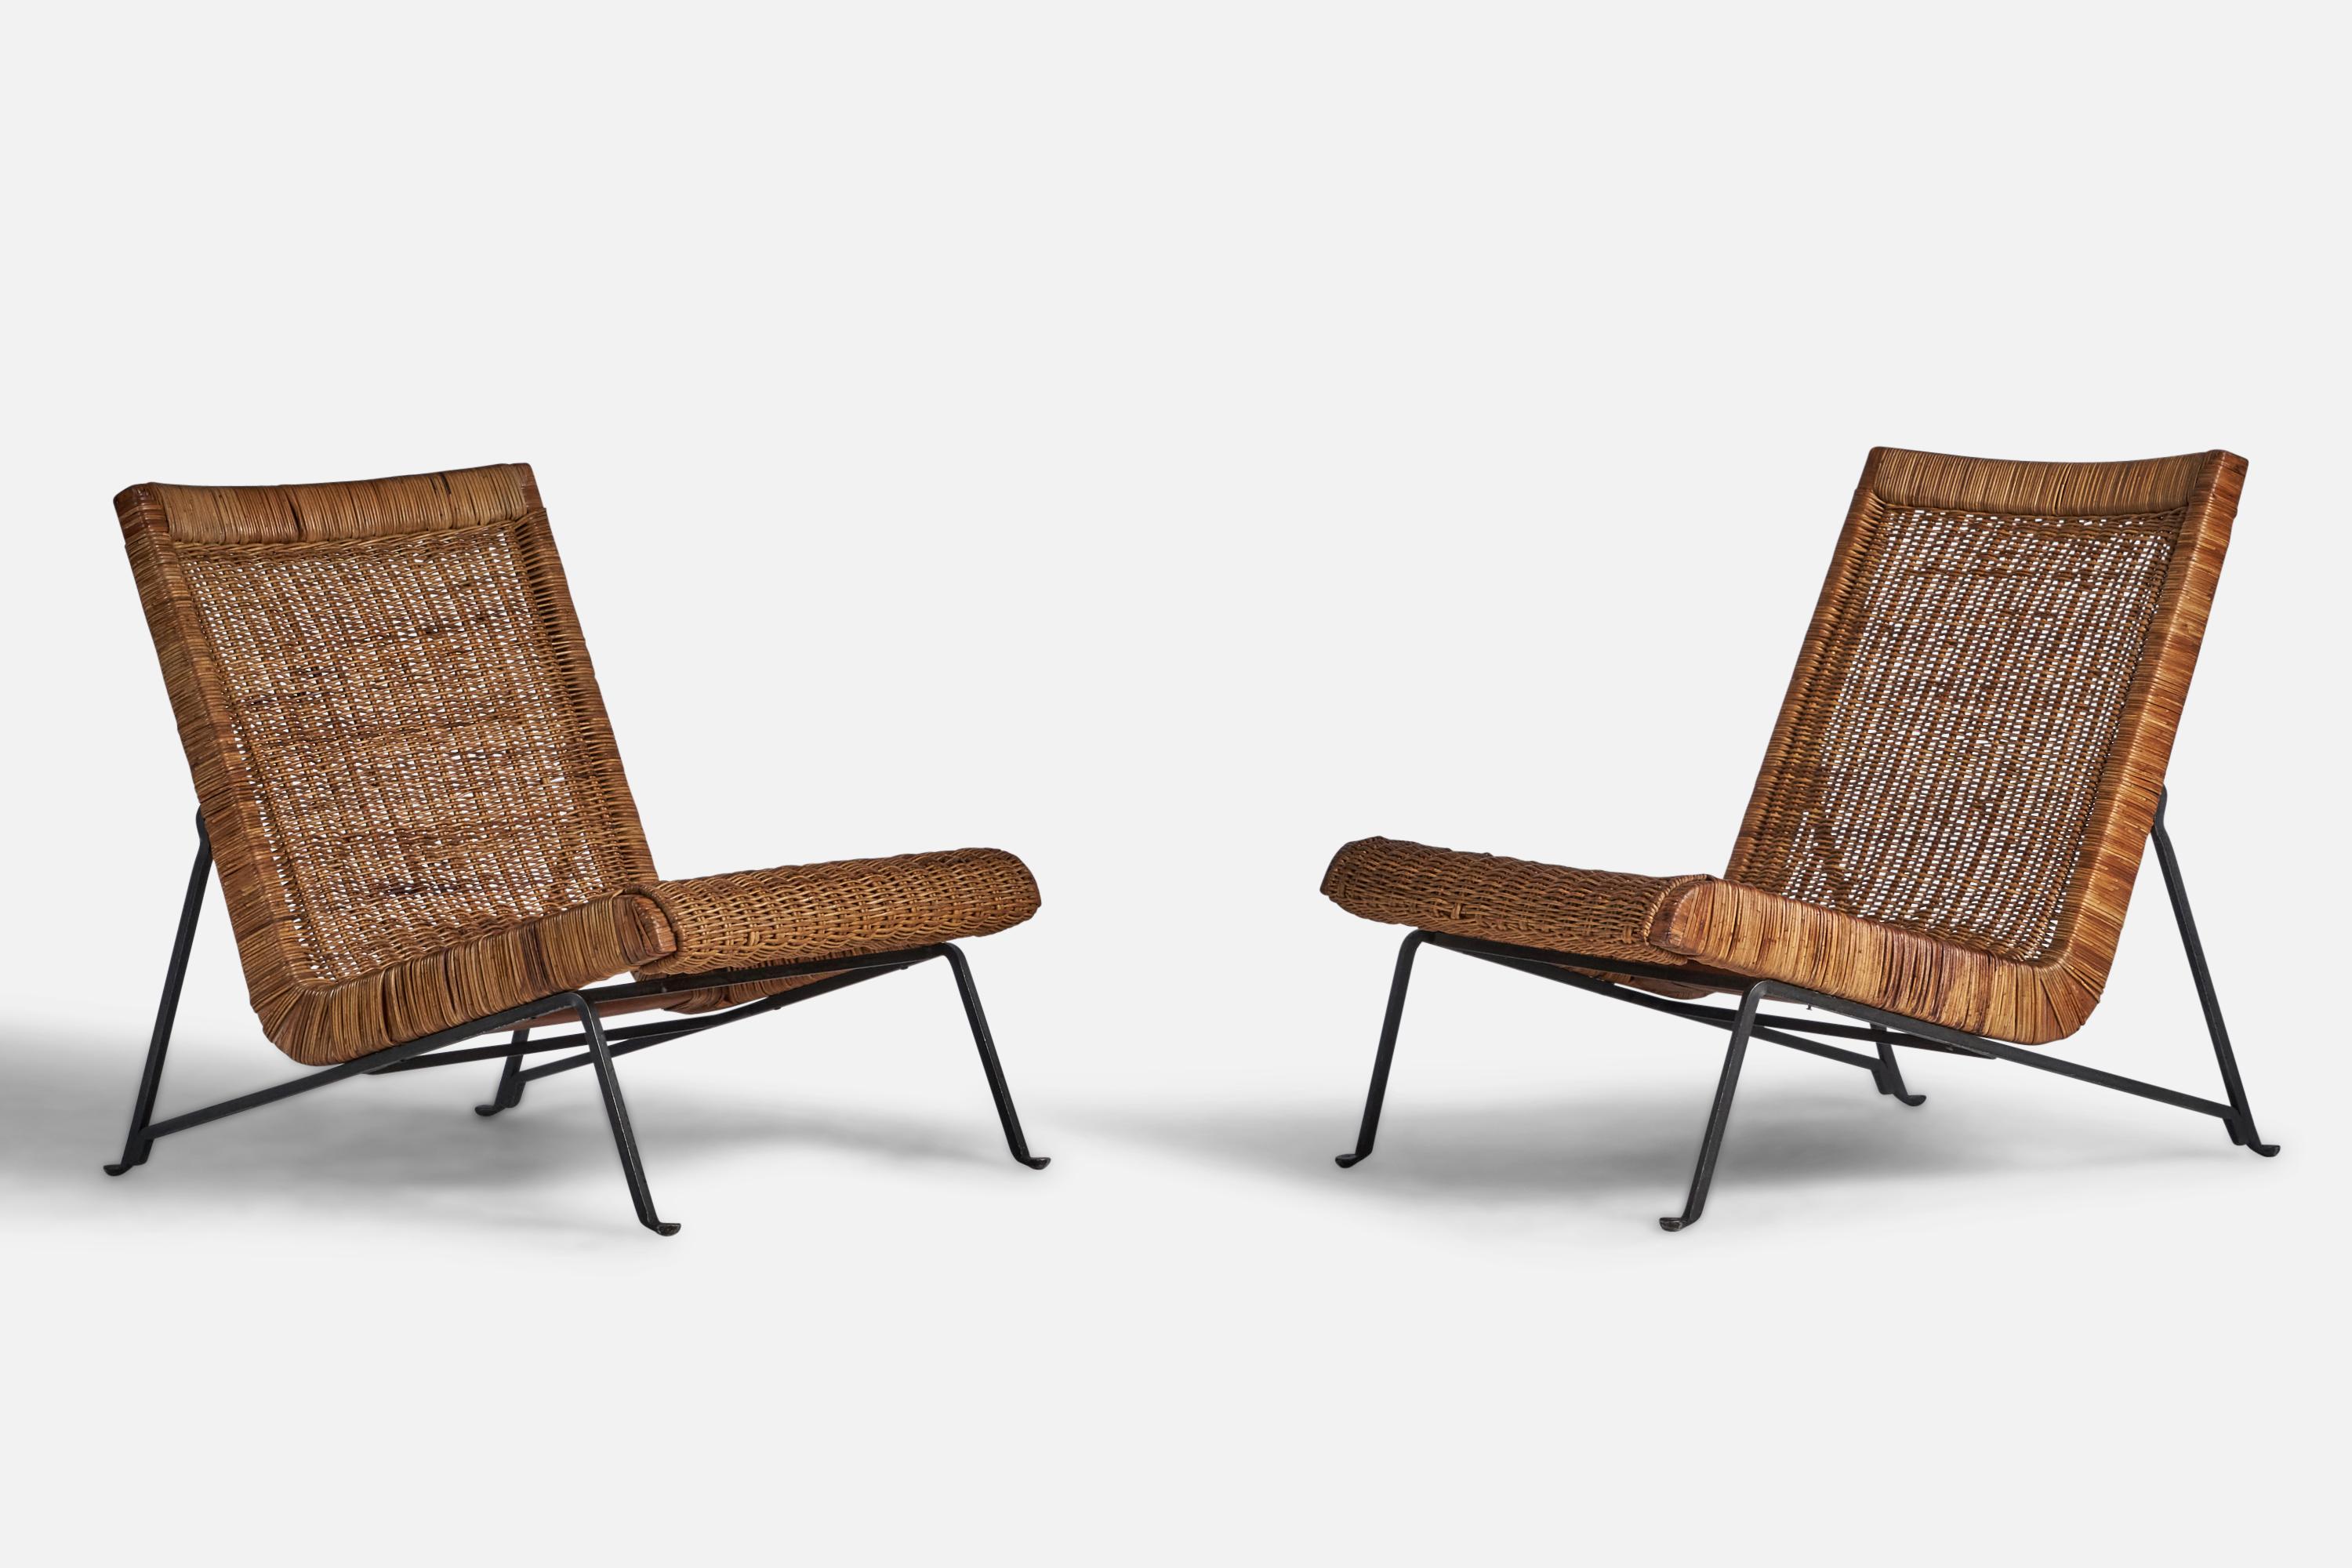 A pair of rattan and black-lacquered iron slipper lounge chairs designed by Maurizio Tempestini and produced by Salterini, Italy, 1950s.
Stamped 